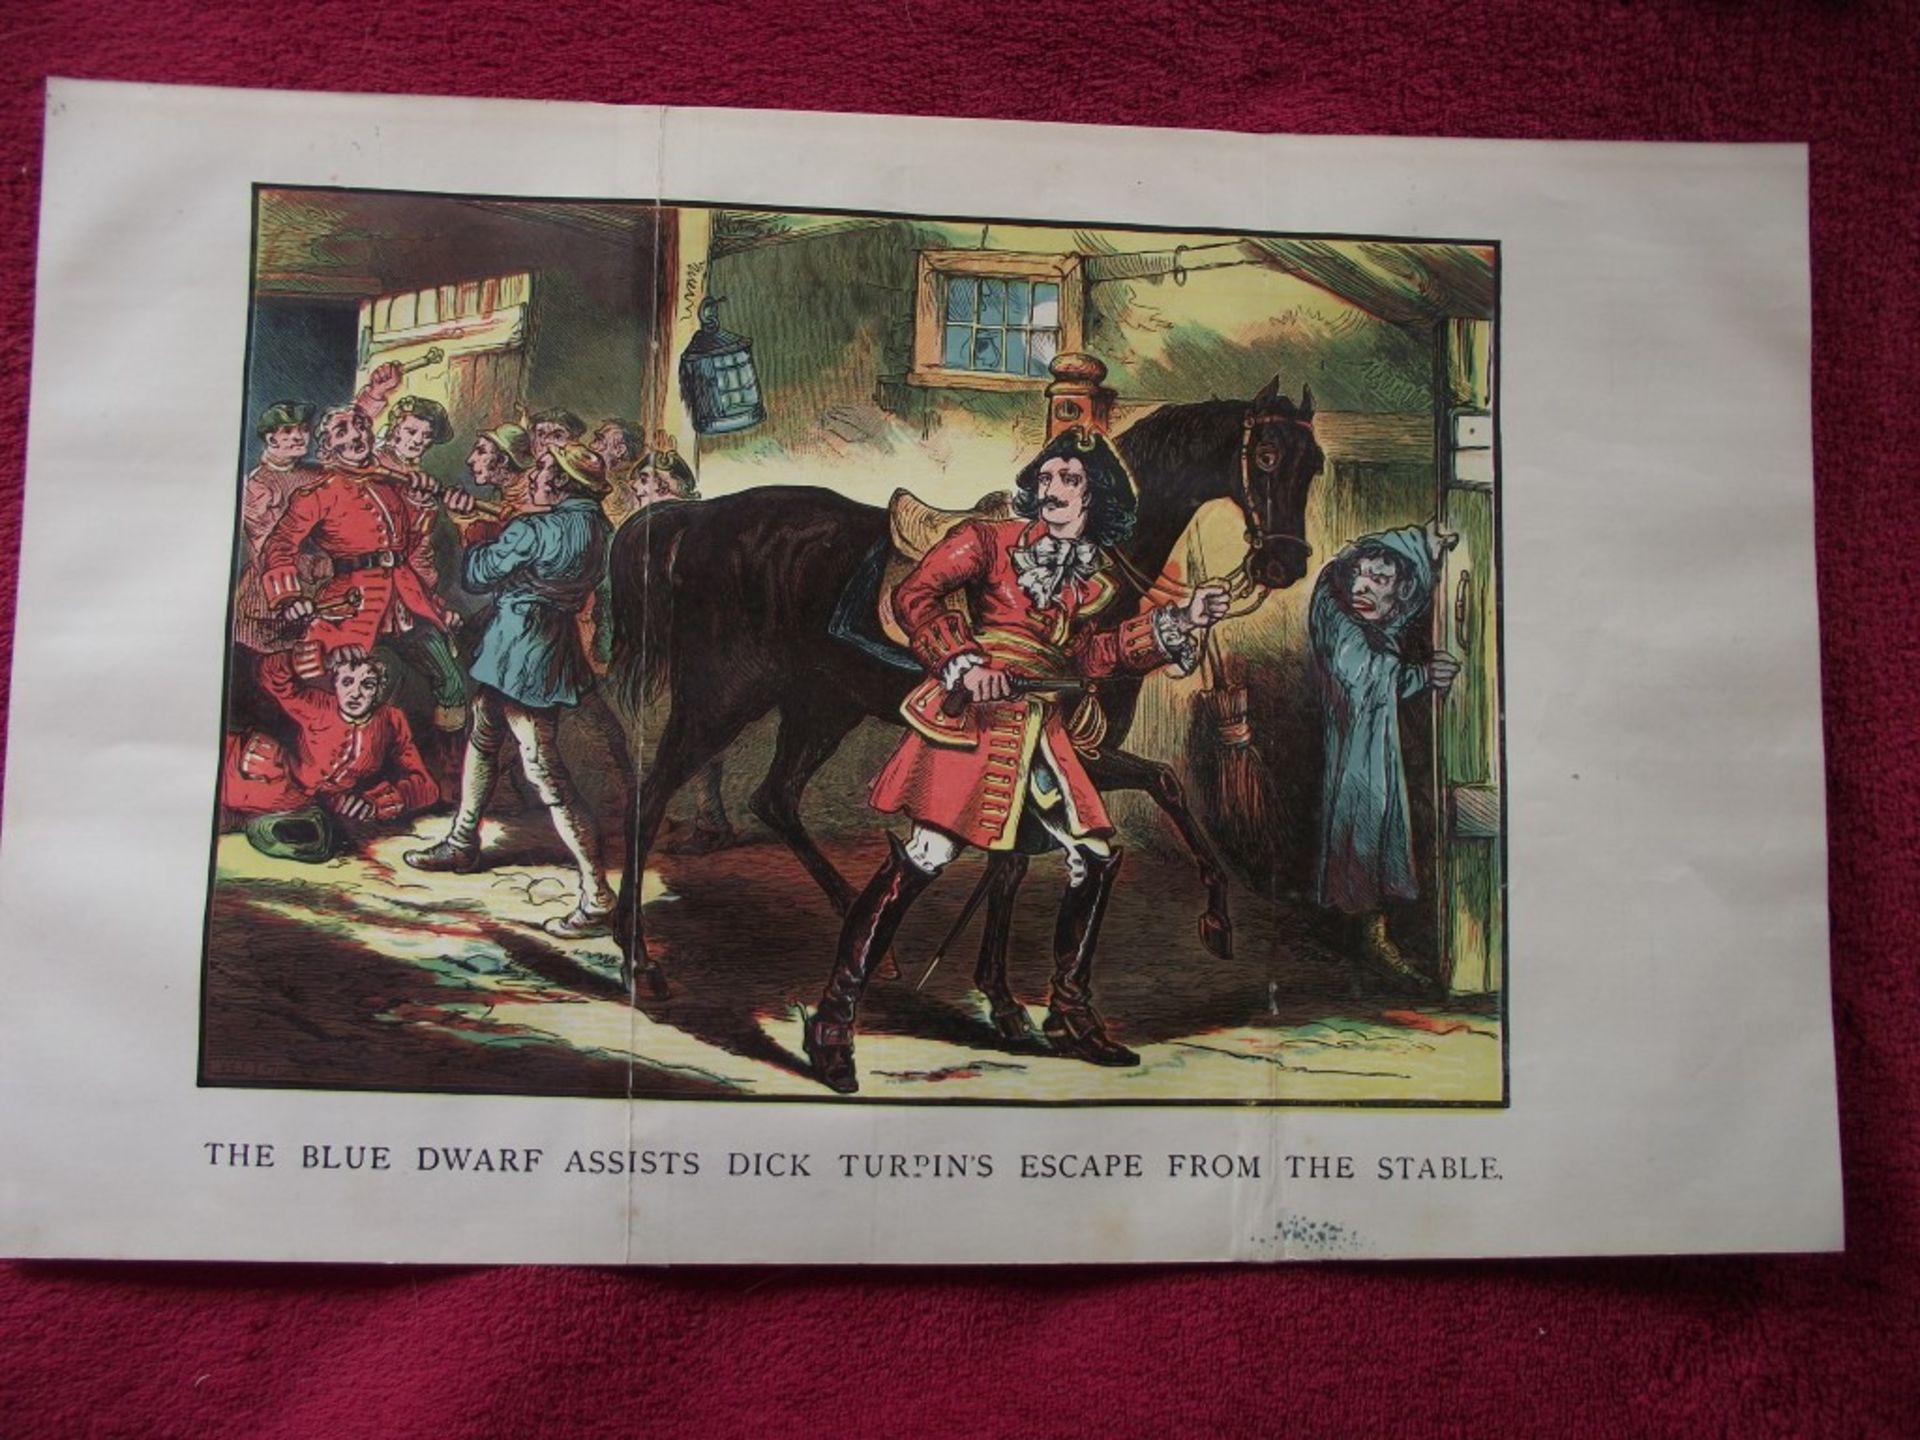 16 x Lithographic Prints From The Blue Dwarf - Percy B. St John - + 14 Prints - Circa 1880's - Image 7 of 39